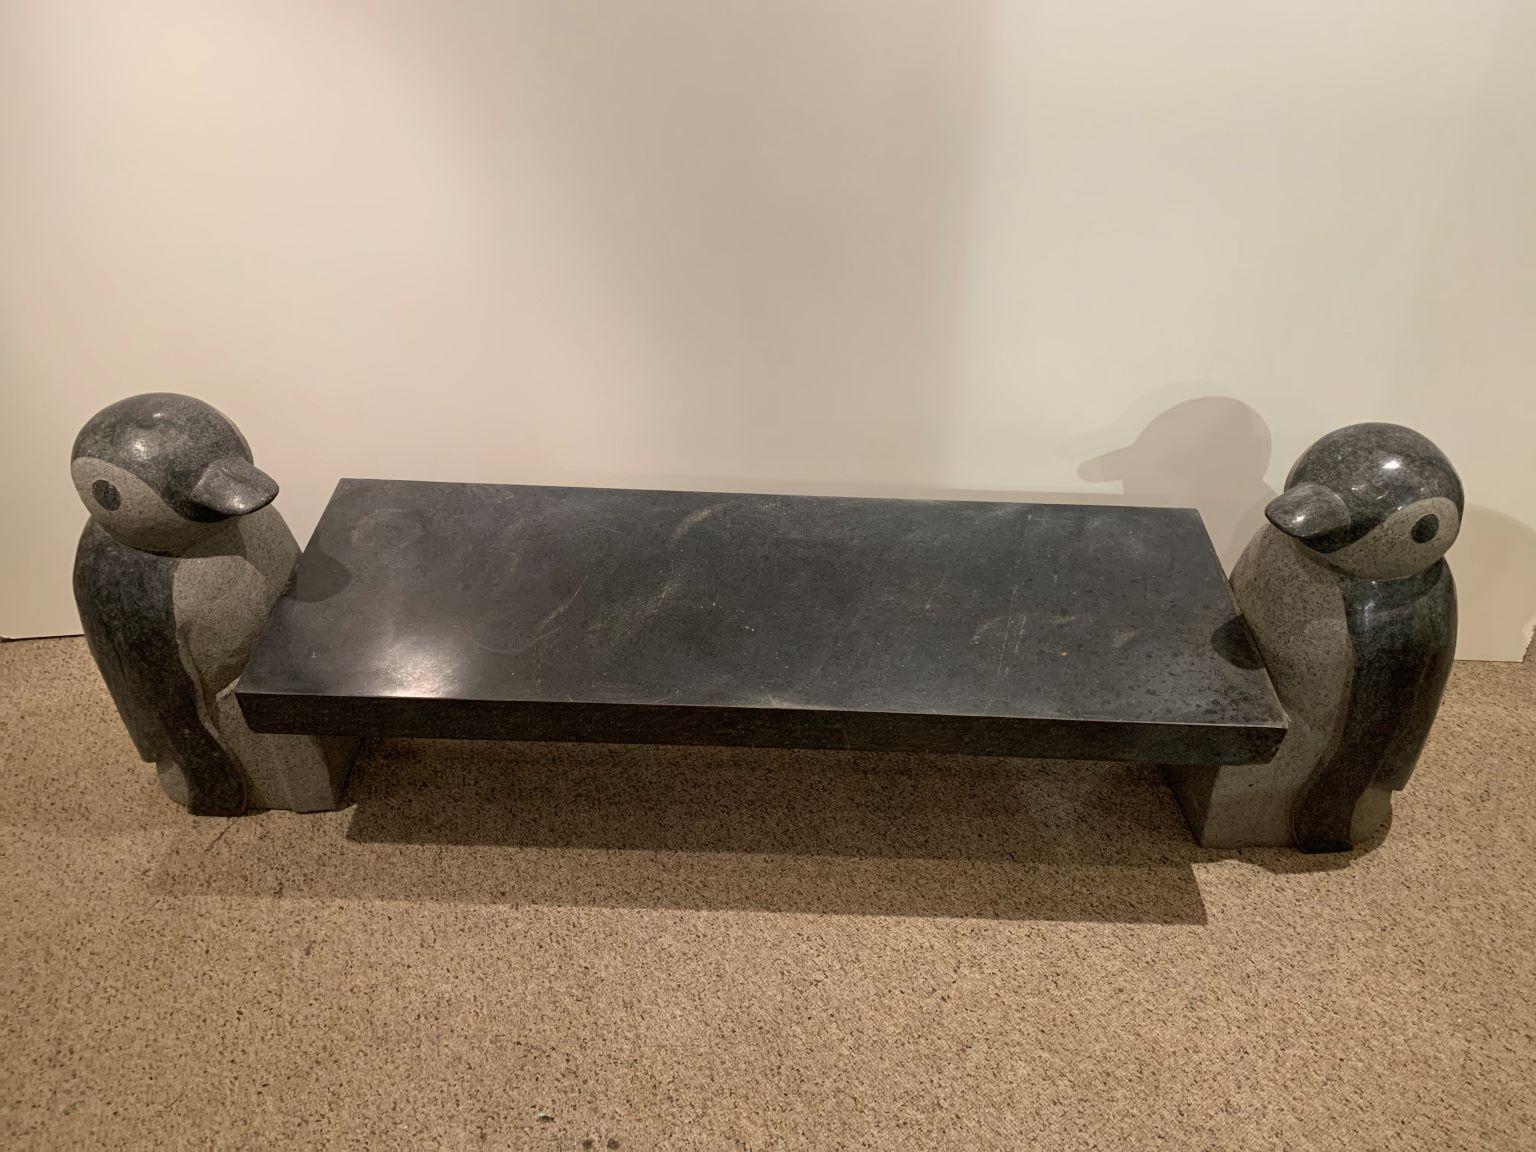 Exceptional and decorative three-piece granite penguin bench or cocktail table. The design is very much in the style of Jeff Koons. The granite does have some small chips to the rectangle center slab piece as to be expected with age and use. The